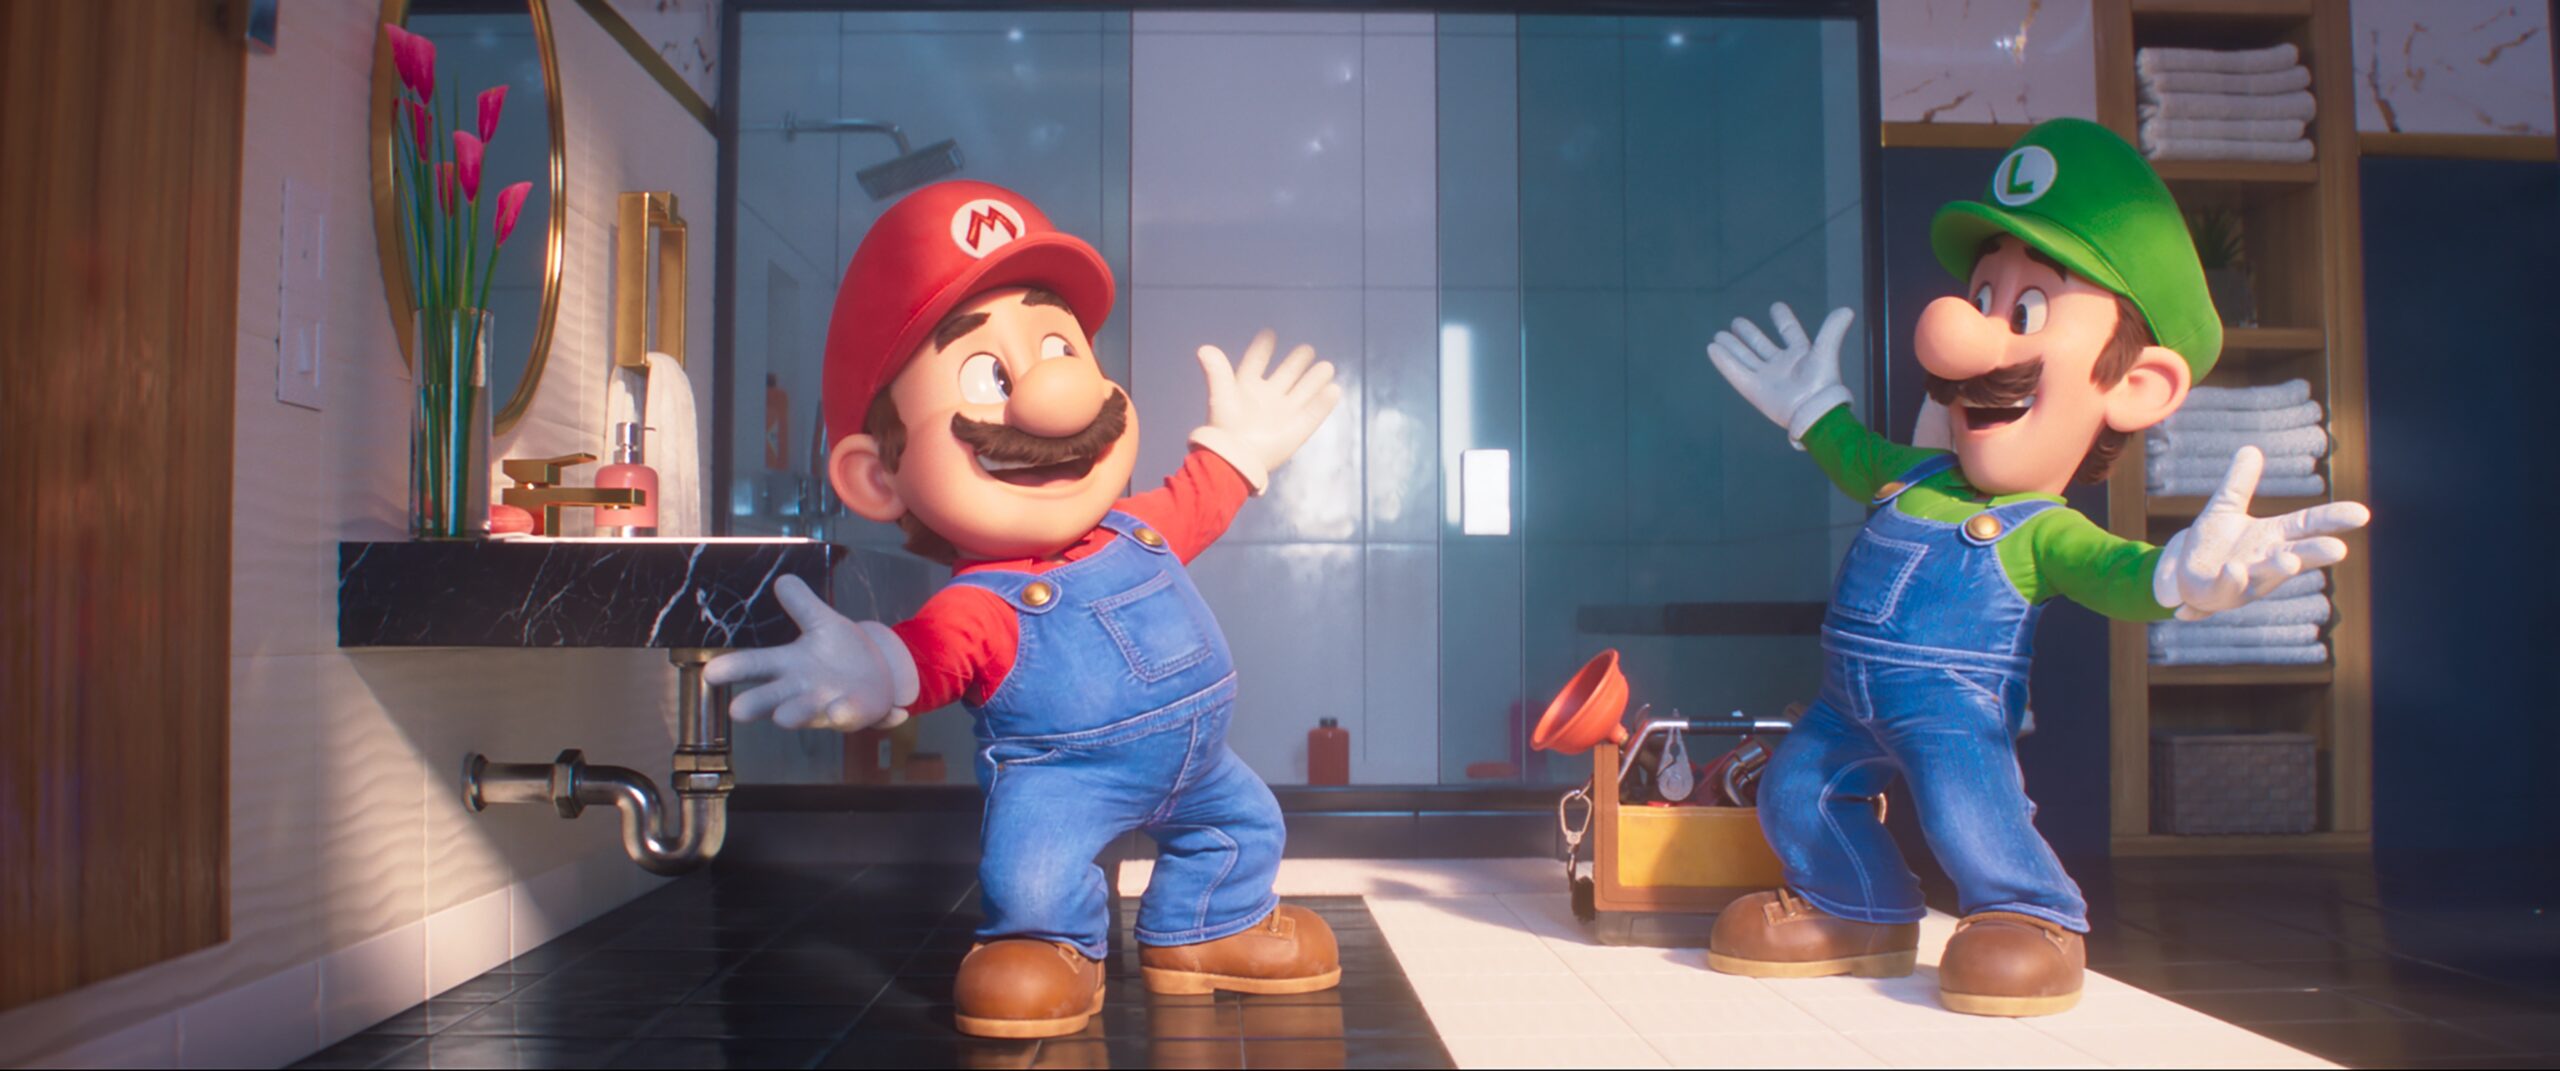 Looks Like We Didn’t Have To Worry About Chris Pratt Voicing Mario in ‘The Super Mario Bros. Movie’